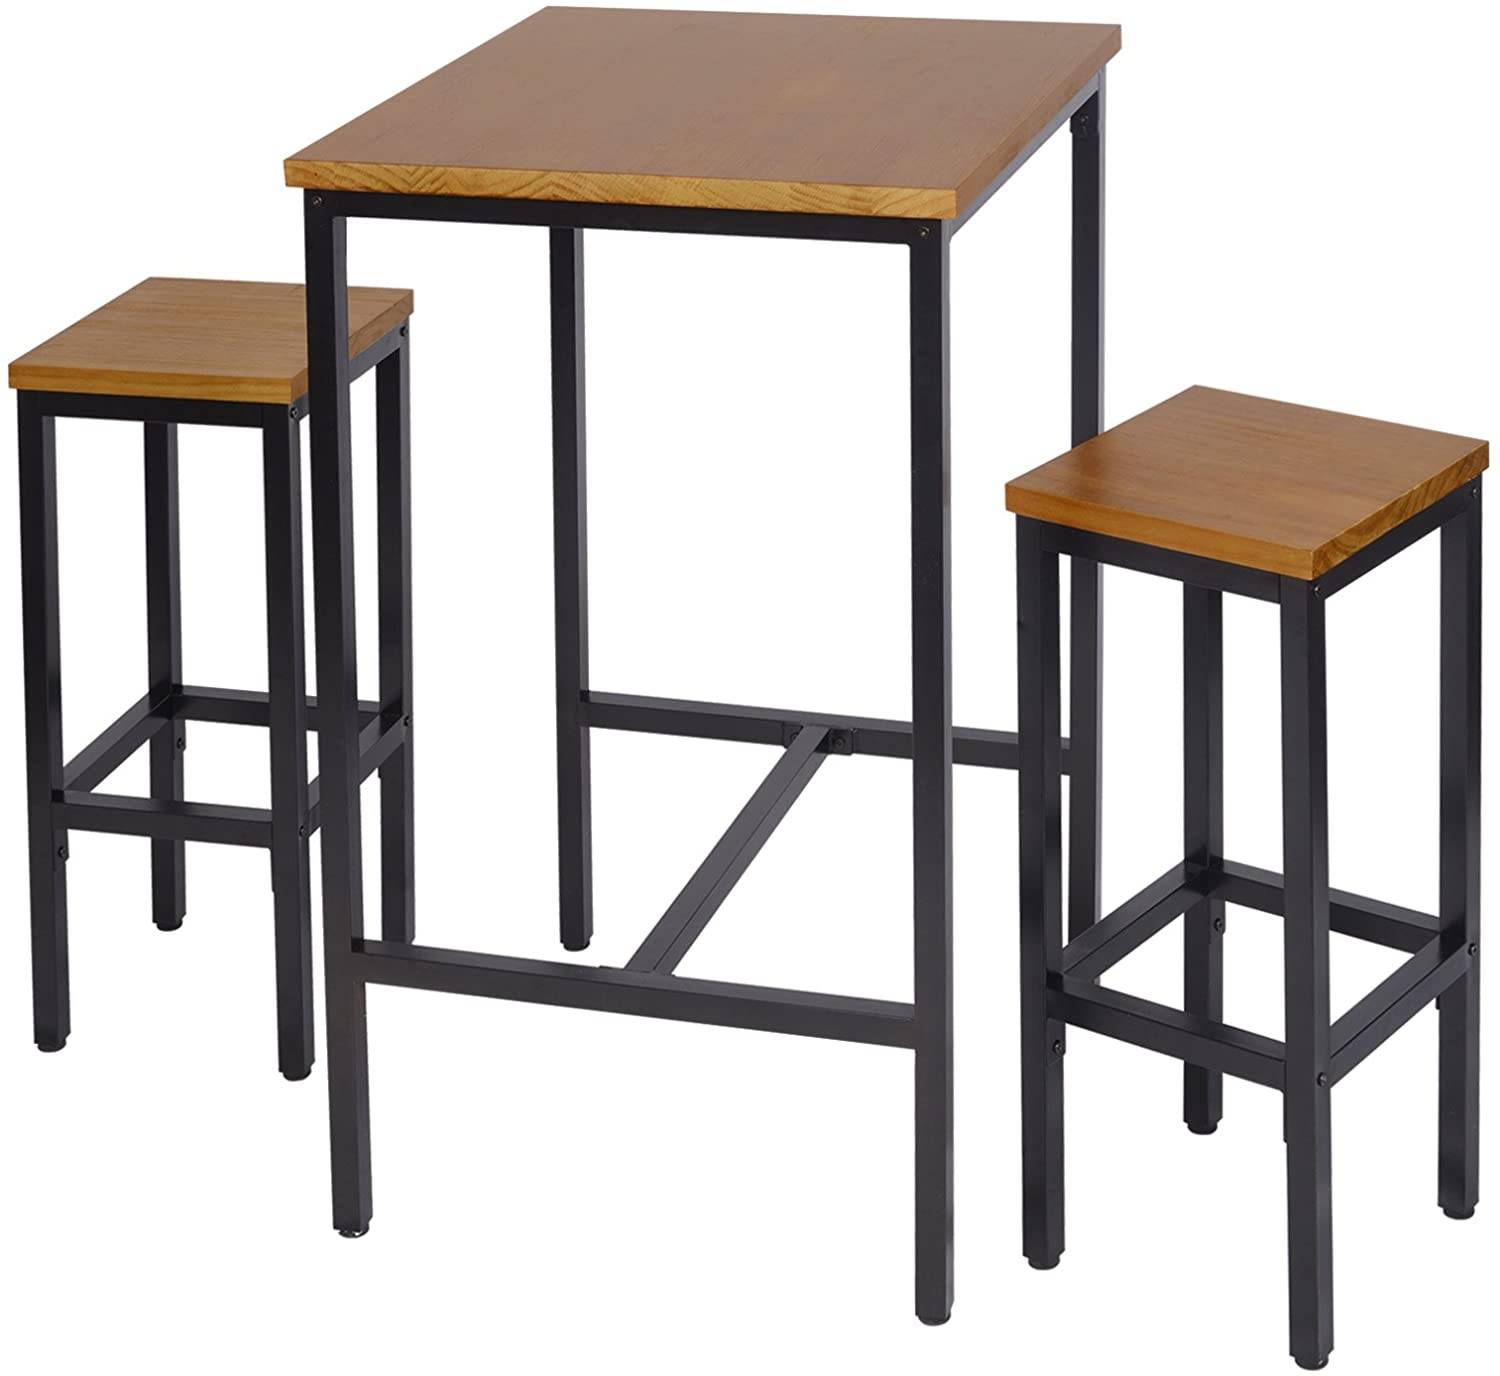 Solid Wood and Durable Steel Made,Oak,BT12hei WOLTU Dining Table and Chair Set